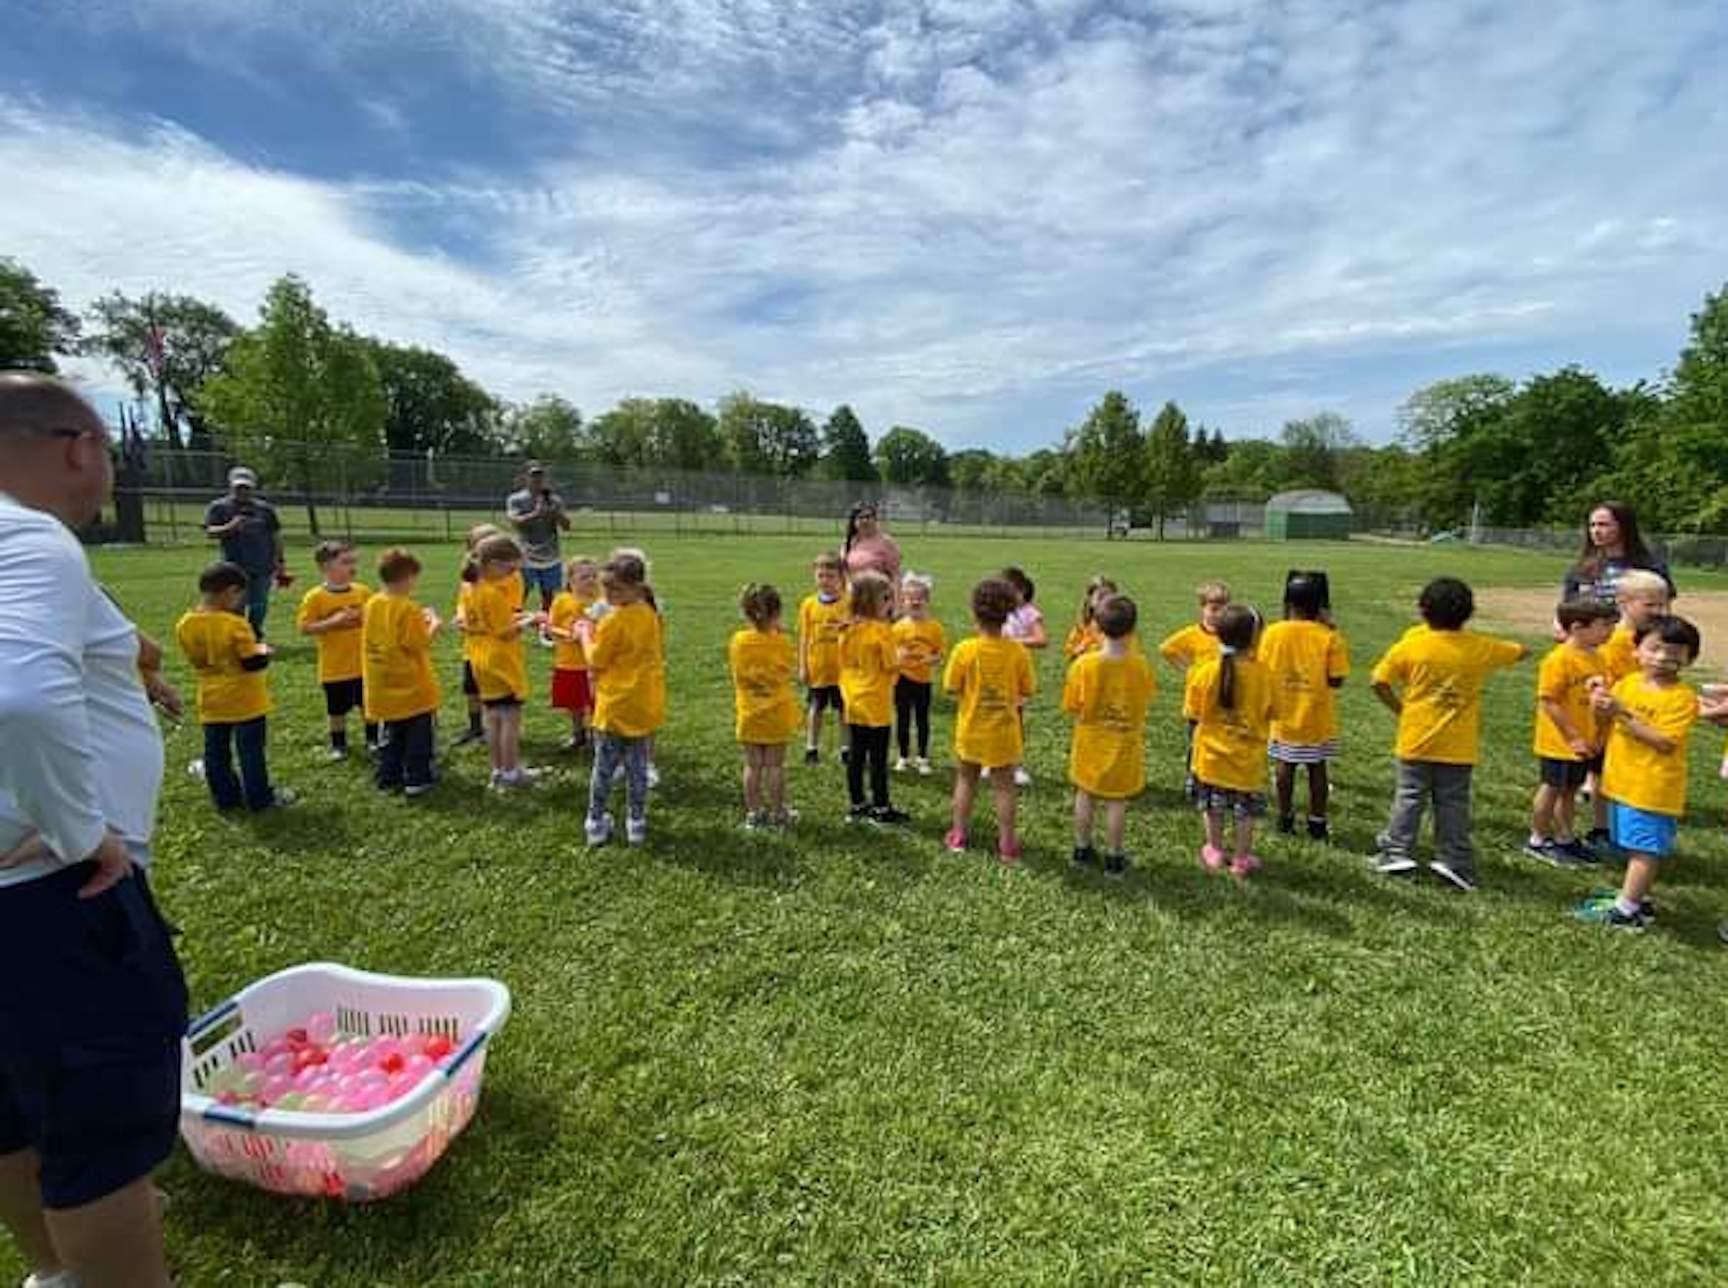 The students line up for a water balloon toss